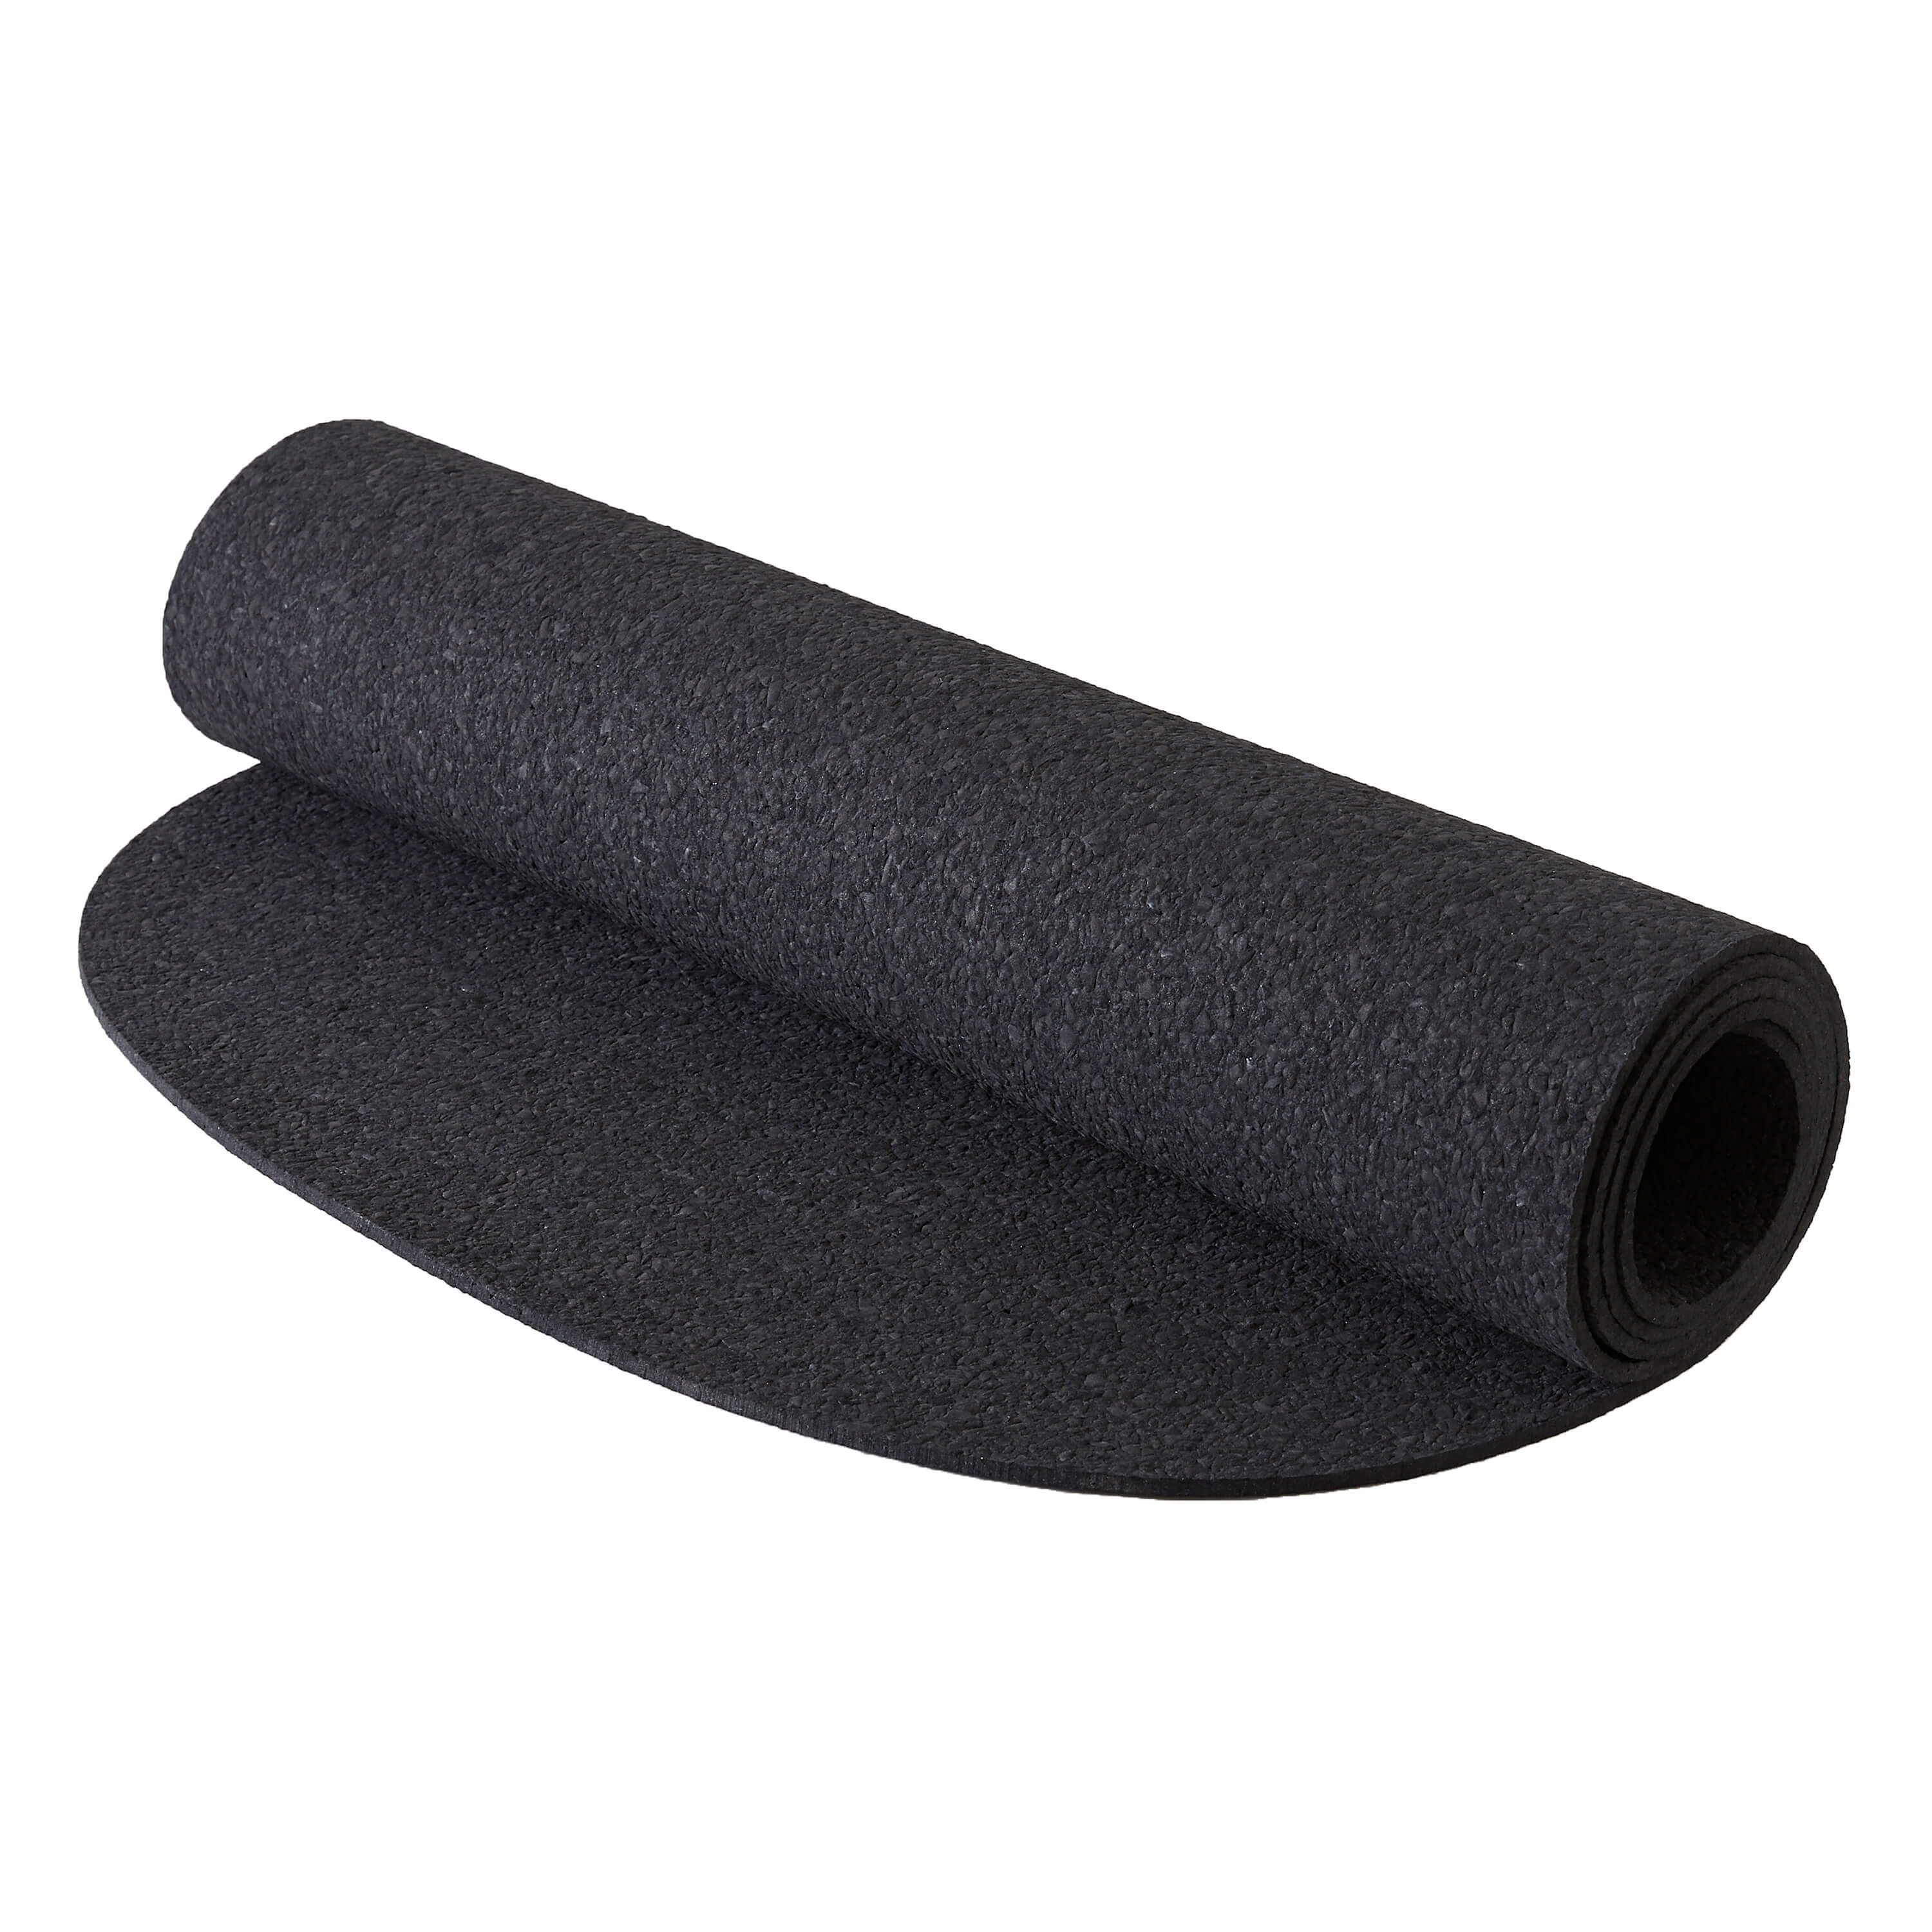 Yoga Mats from Recycled Rubber